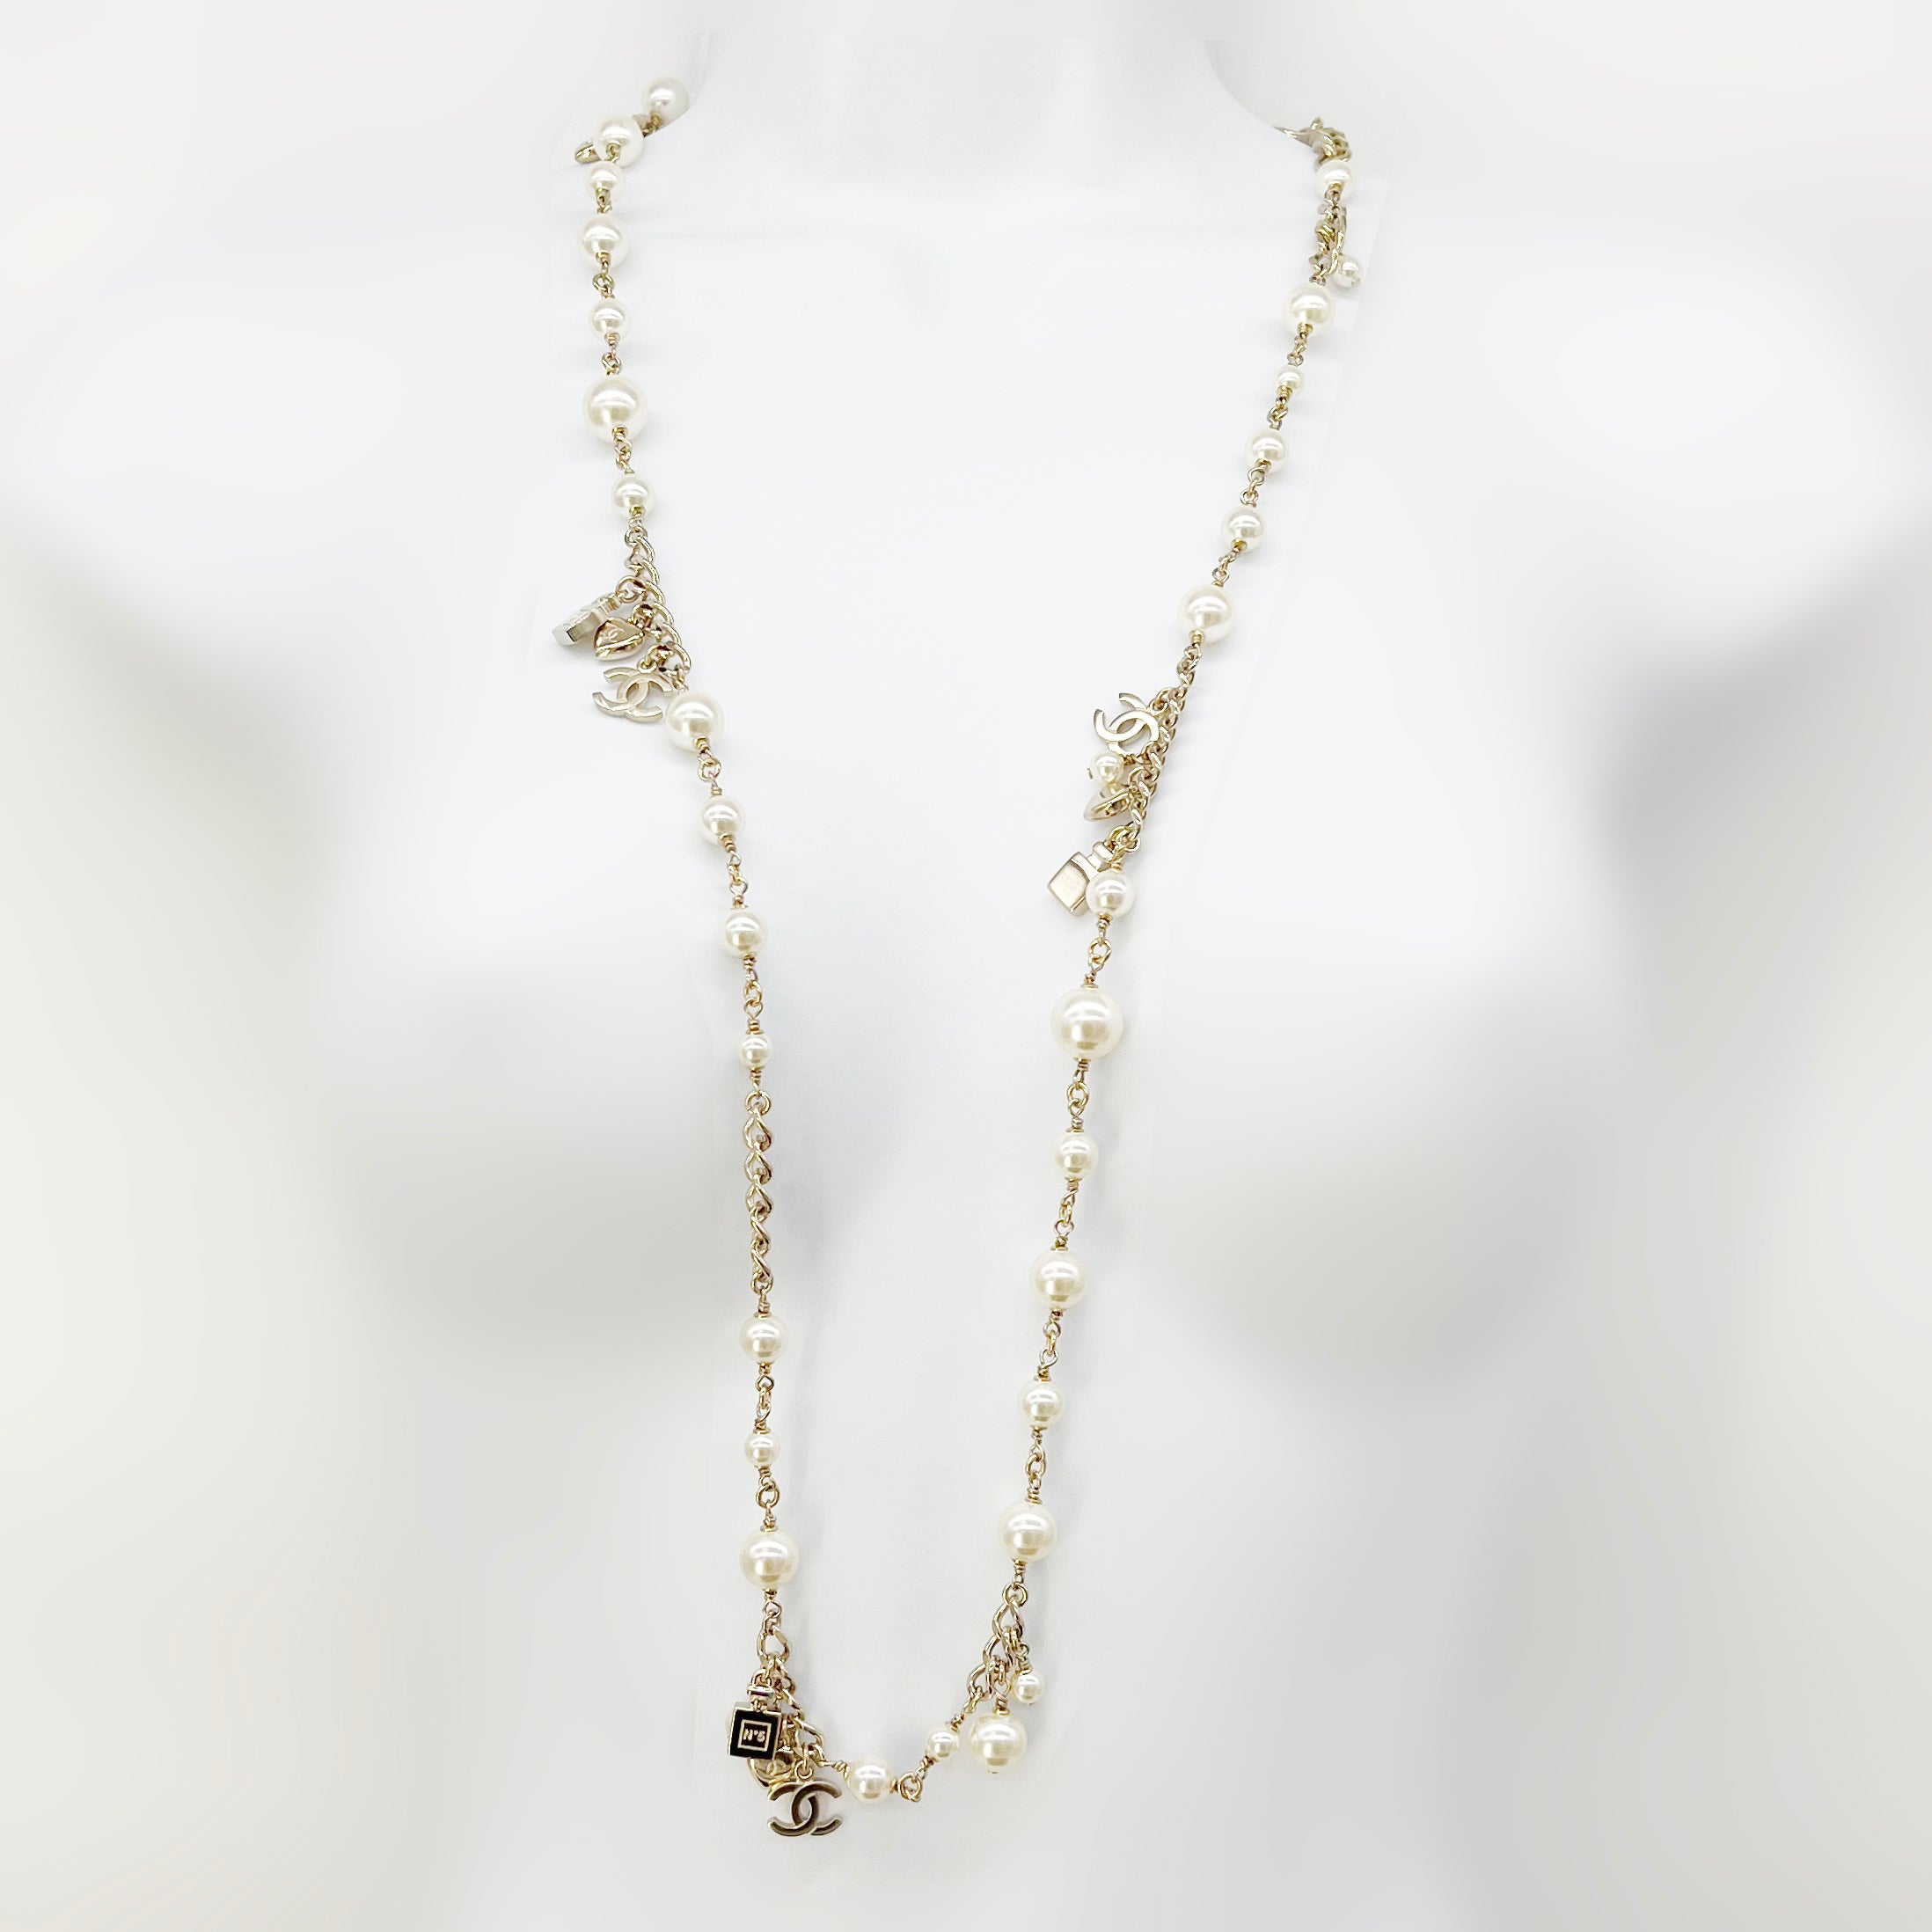 Chanel long CC and maltese cross pendant pearls and biets necklace.